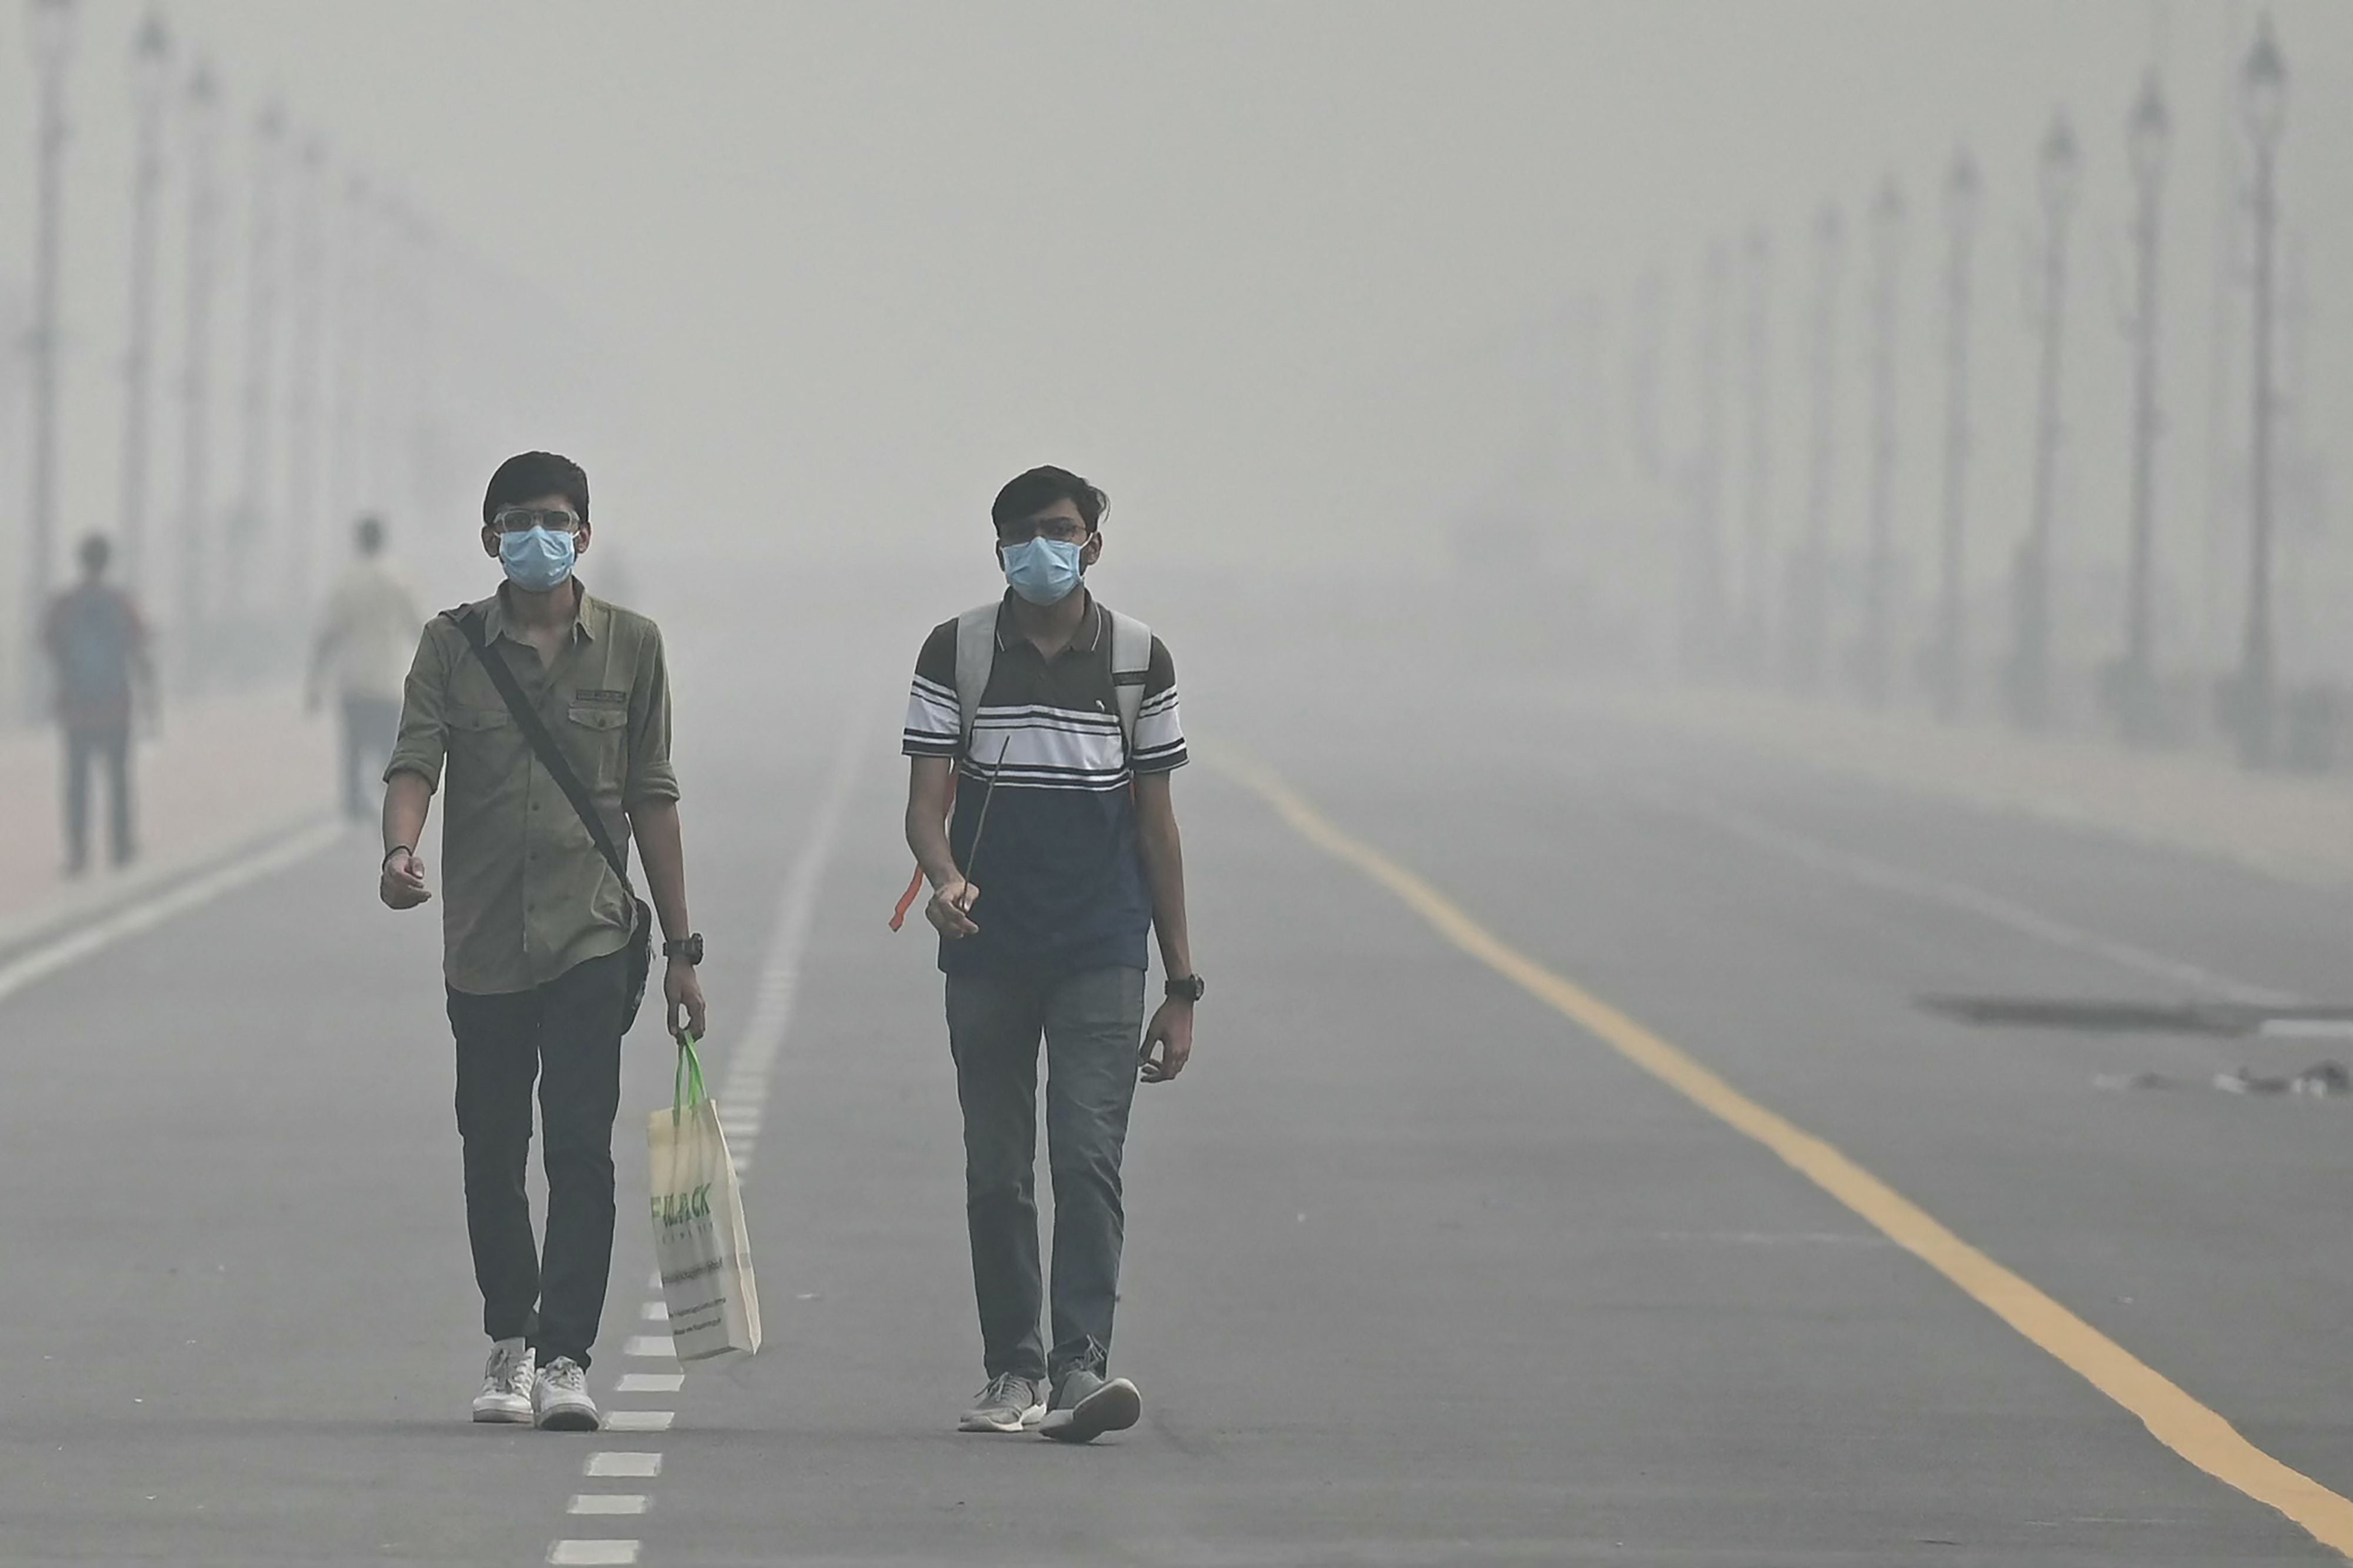 People have resorted to wearing masks due to the heavy pollution in Delhi over the past week